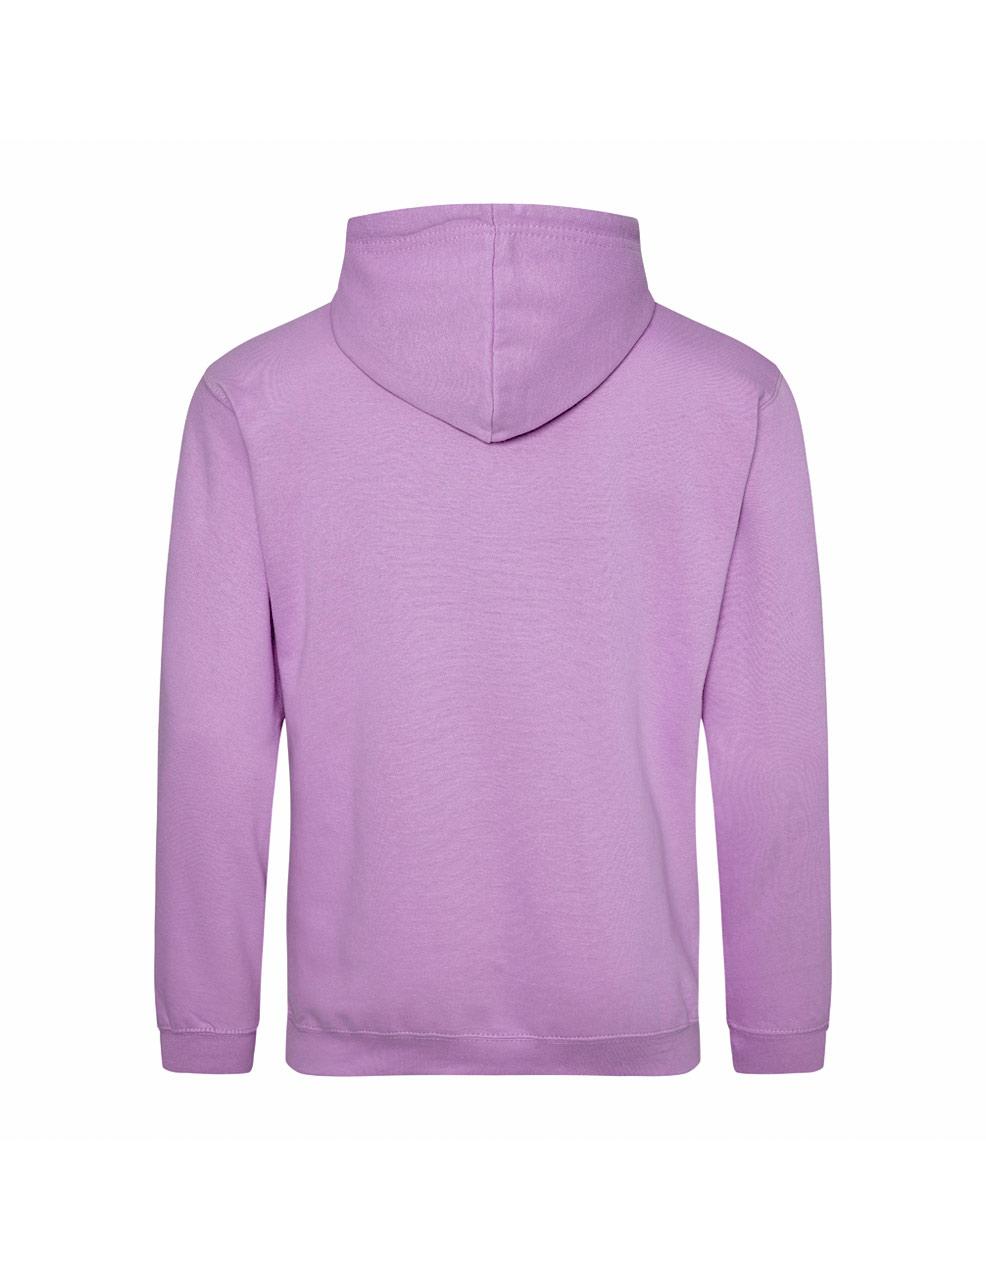 Unisex pullover hoodie — lavender (back view)